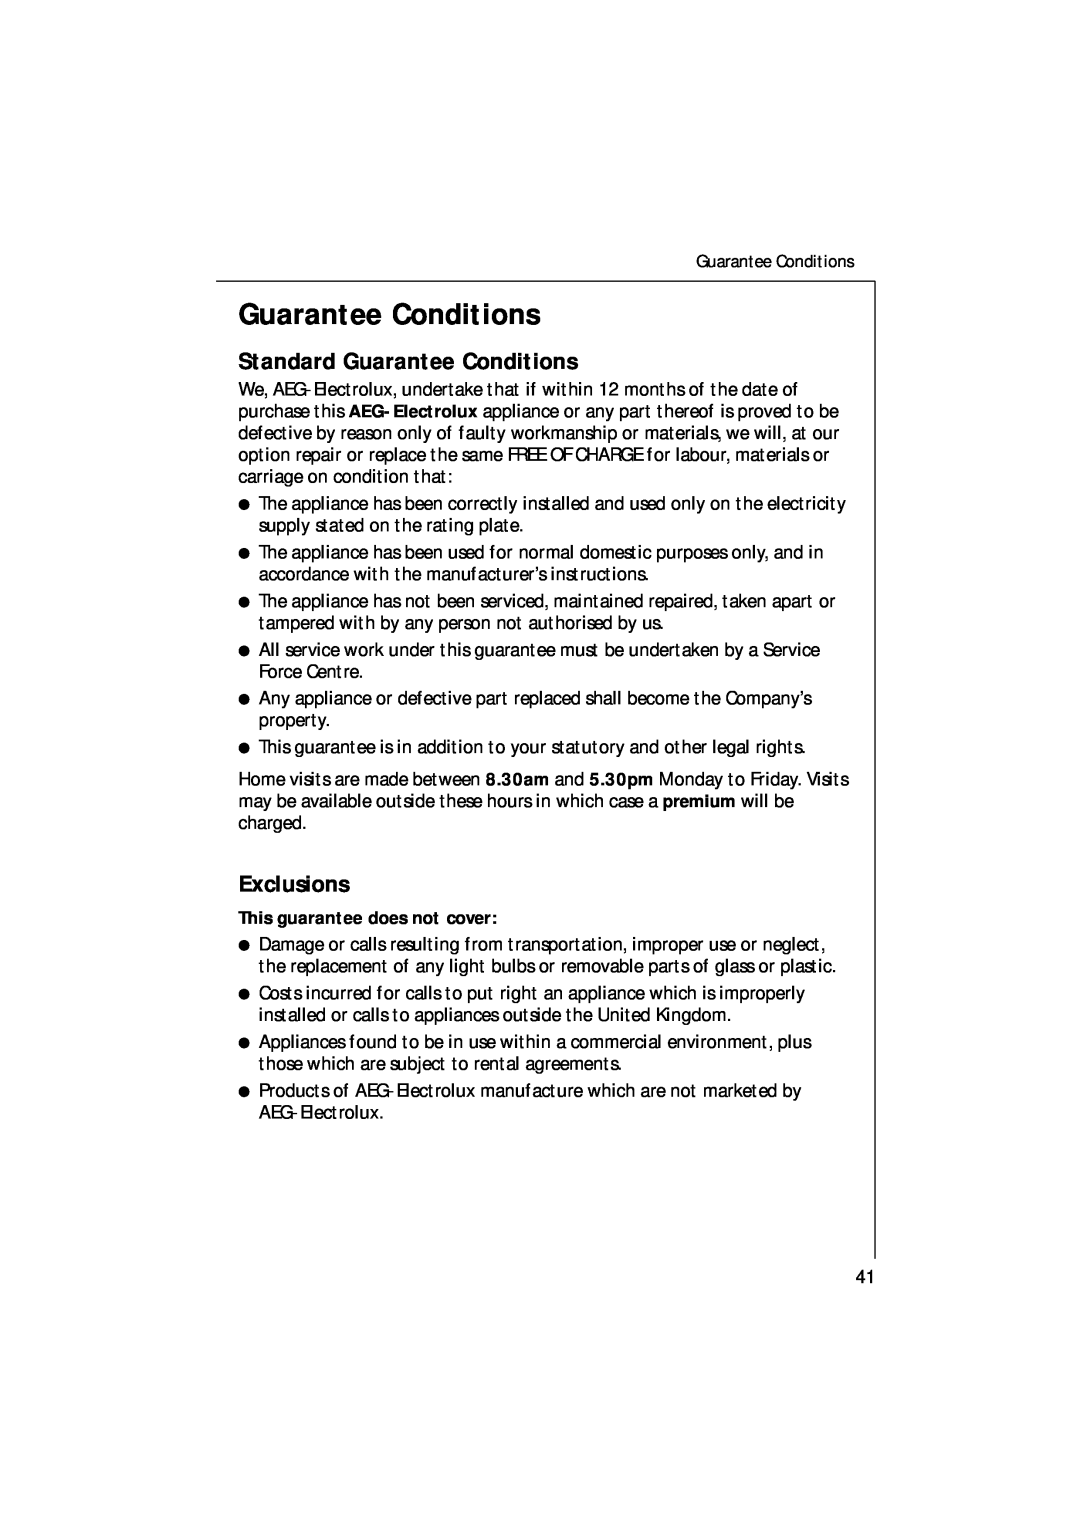 Electrolux 85480 VI manual Standard Guarantee Conditions, Exclusions 